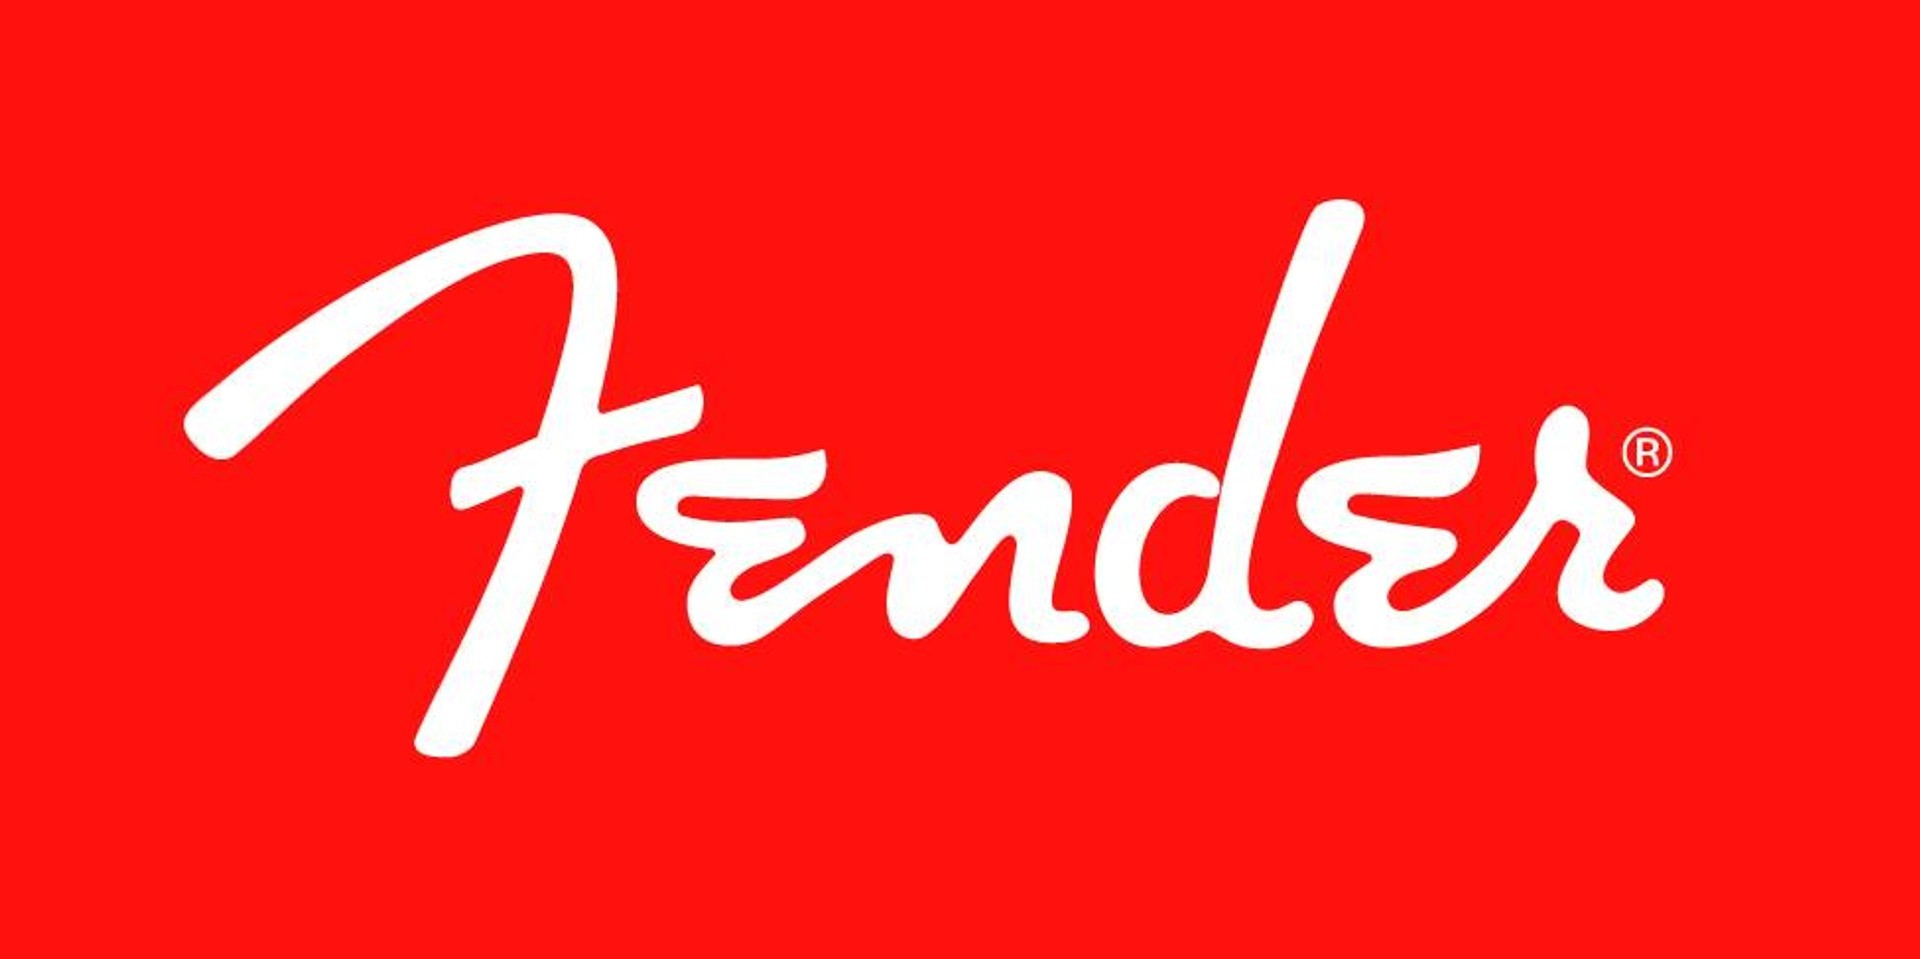 Learn guitar, bass, and ukulele from Fender Play for free while in quarantine